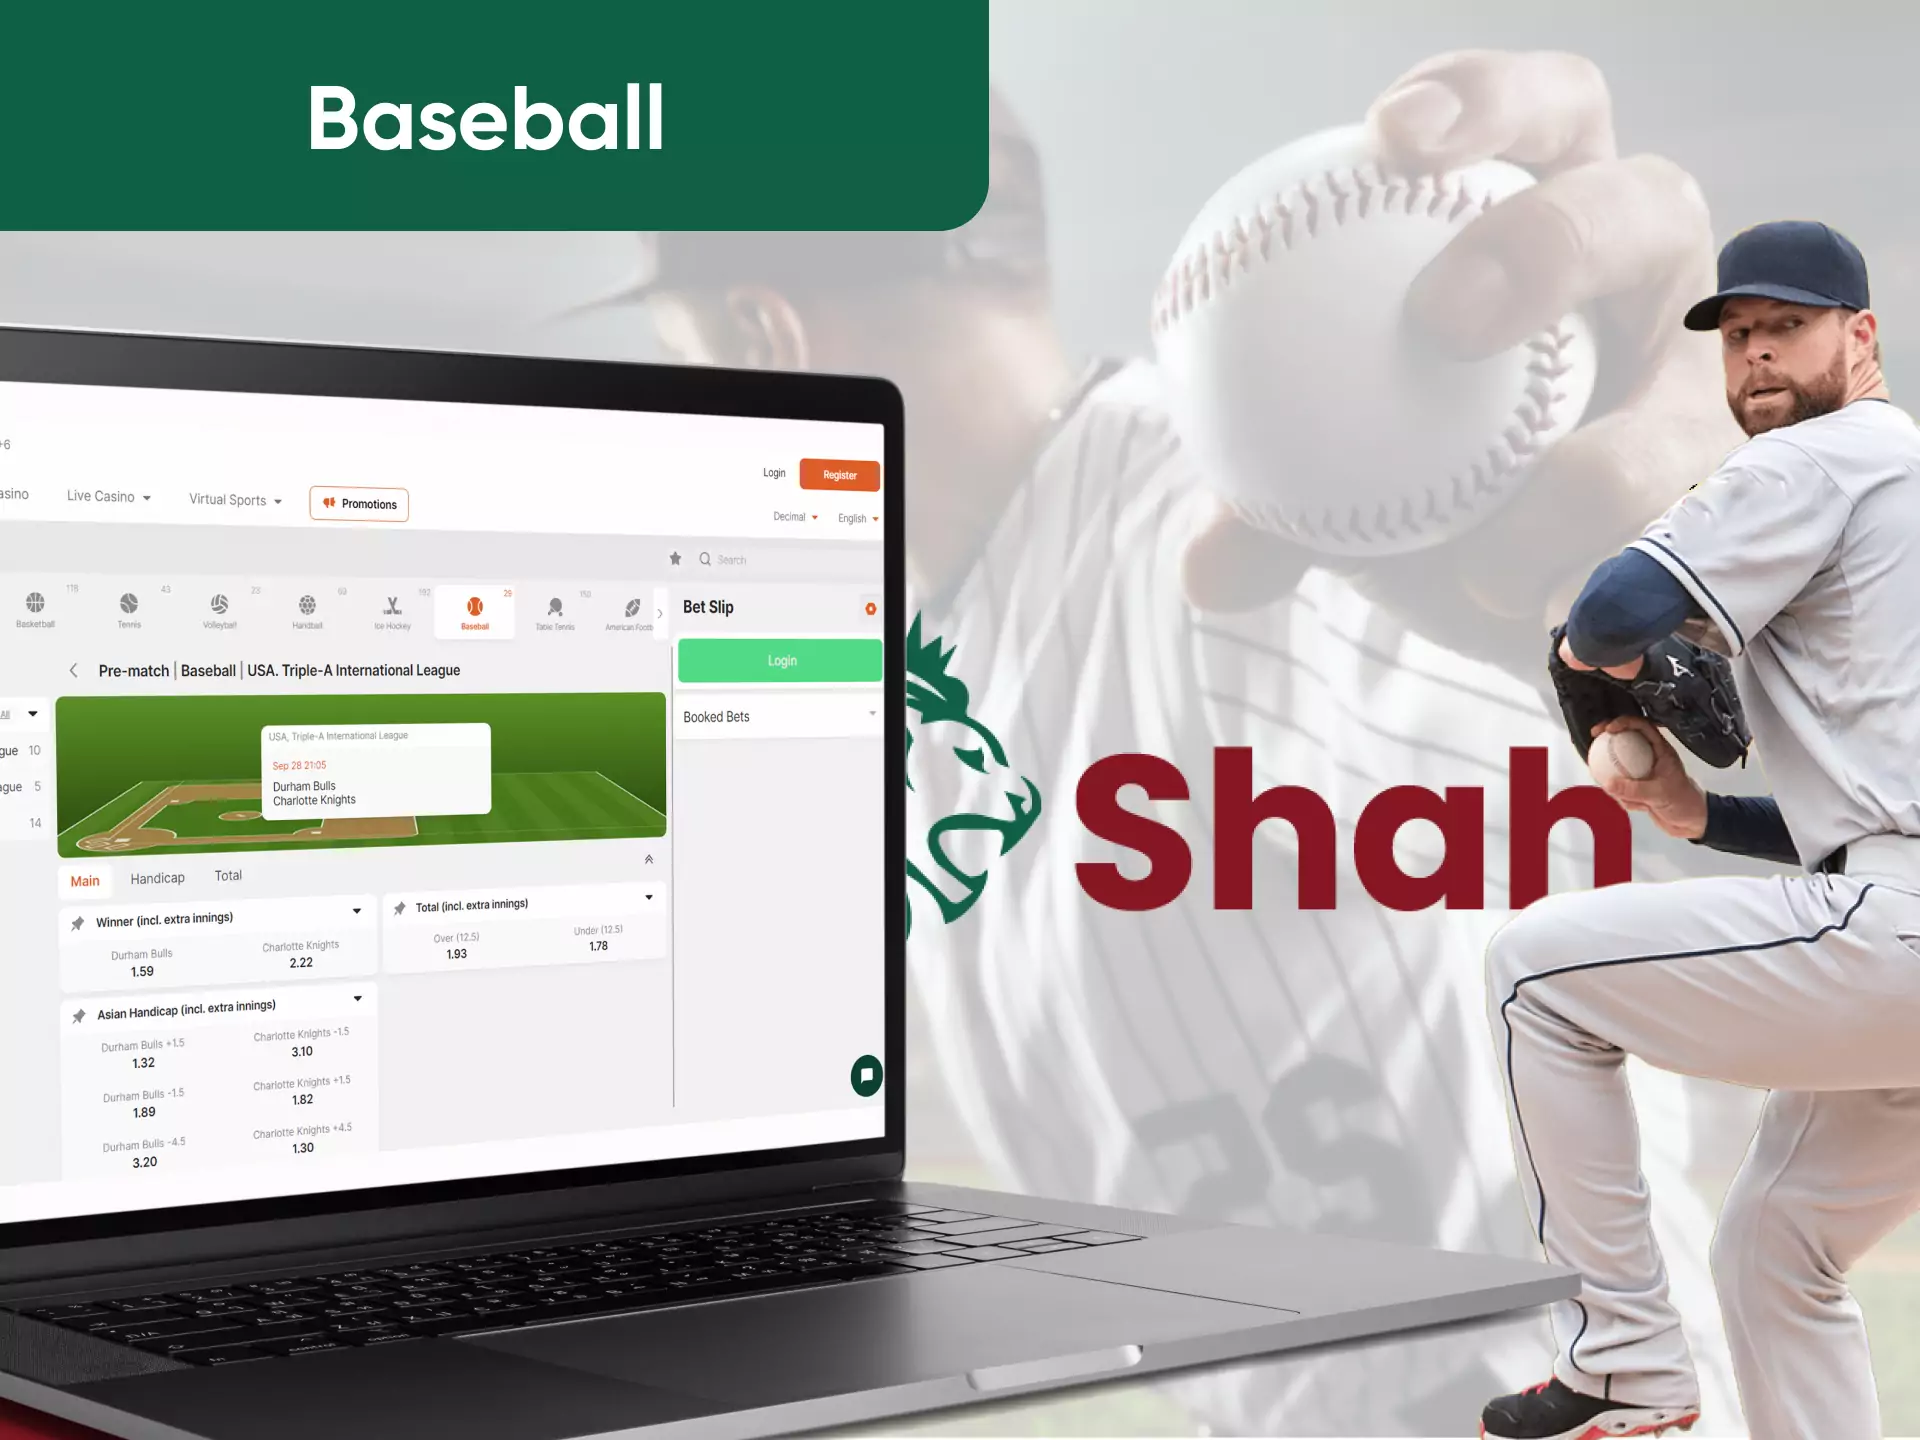 On the website of Betshah, you can bet on baseball events.